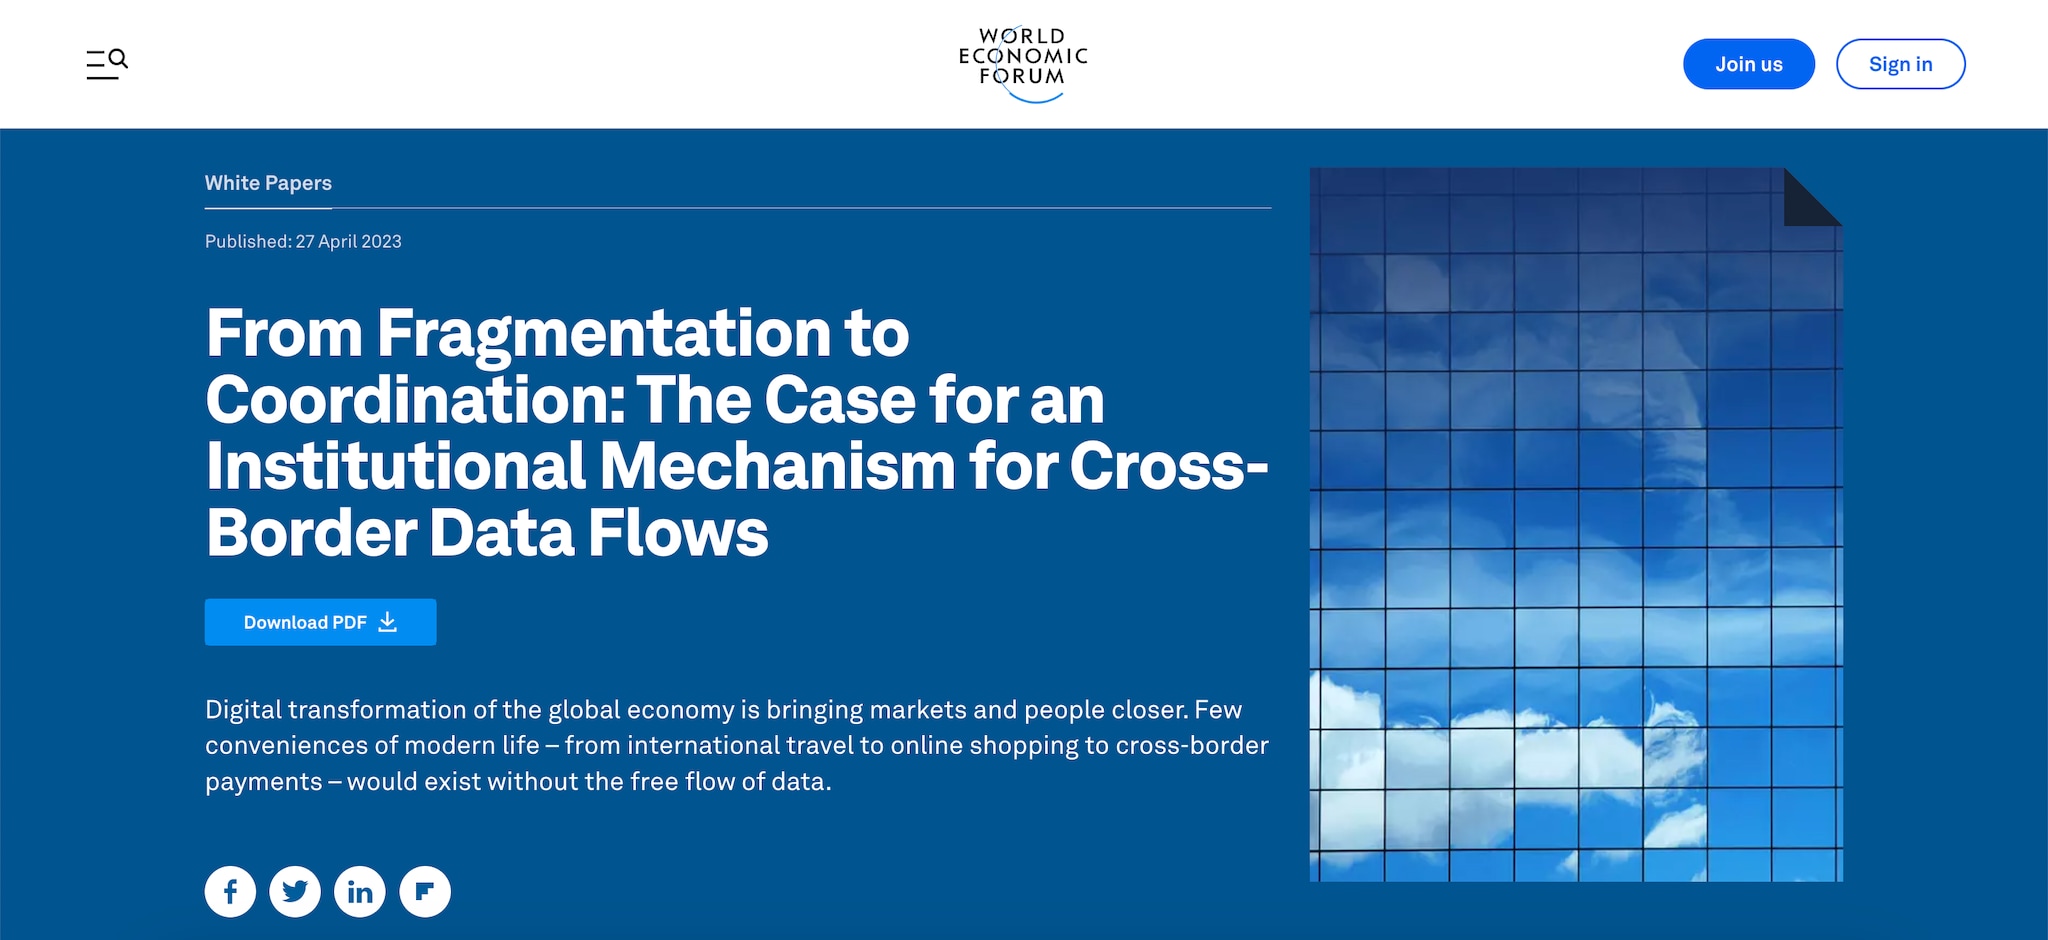 From Fragmentation to Coordination: The Case for an Institutional Mechanism for Cross-Border Data Flows